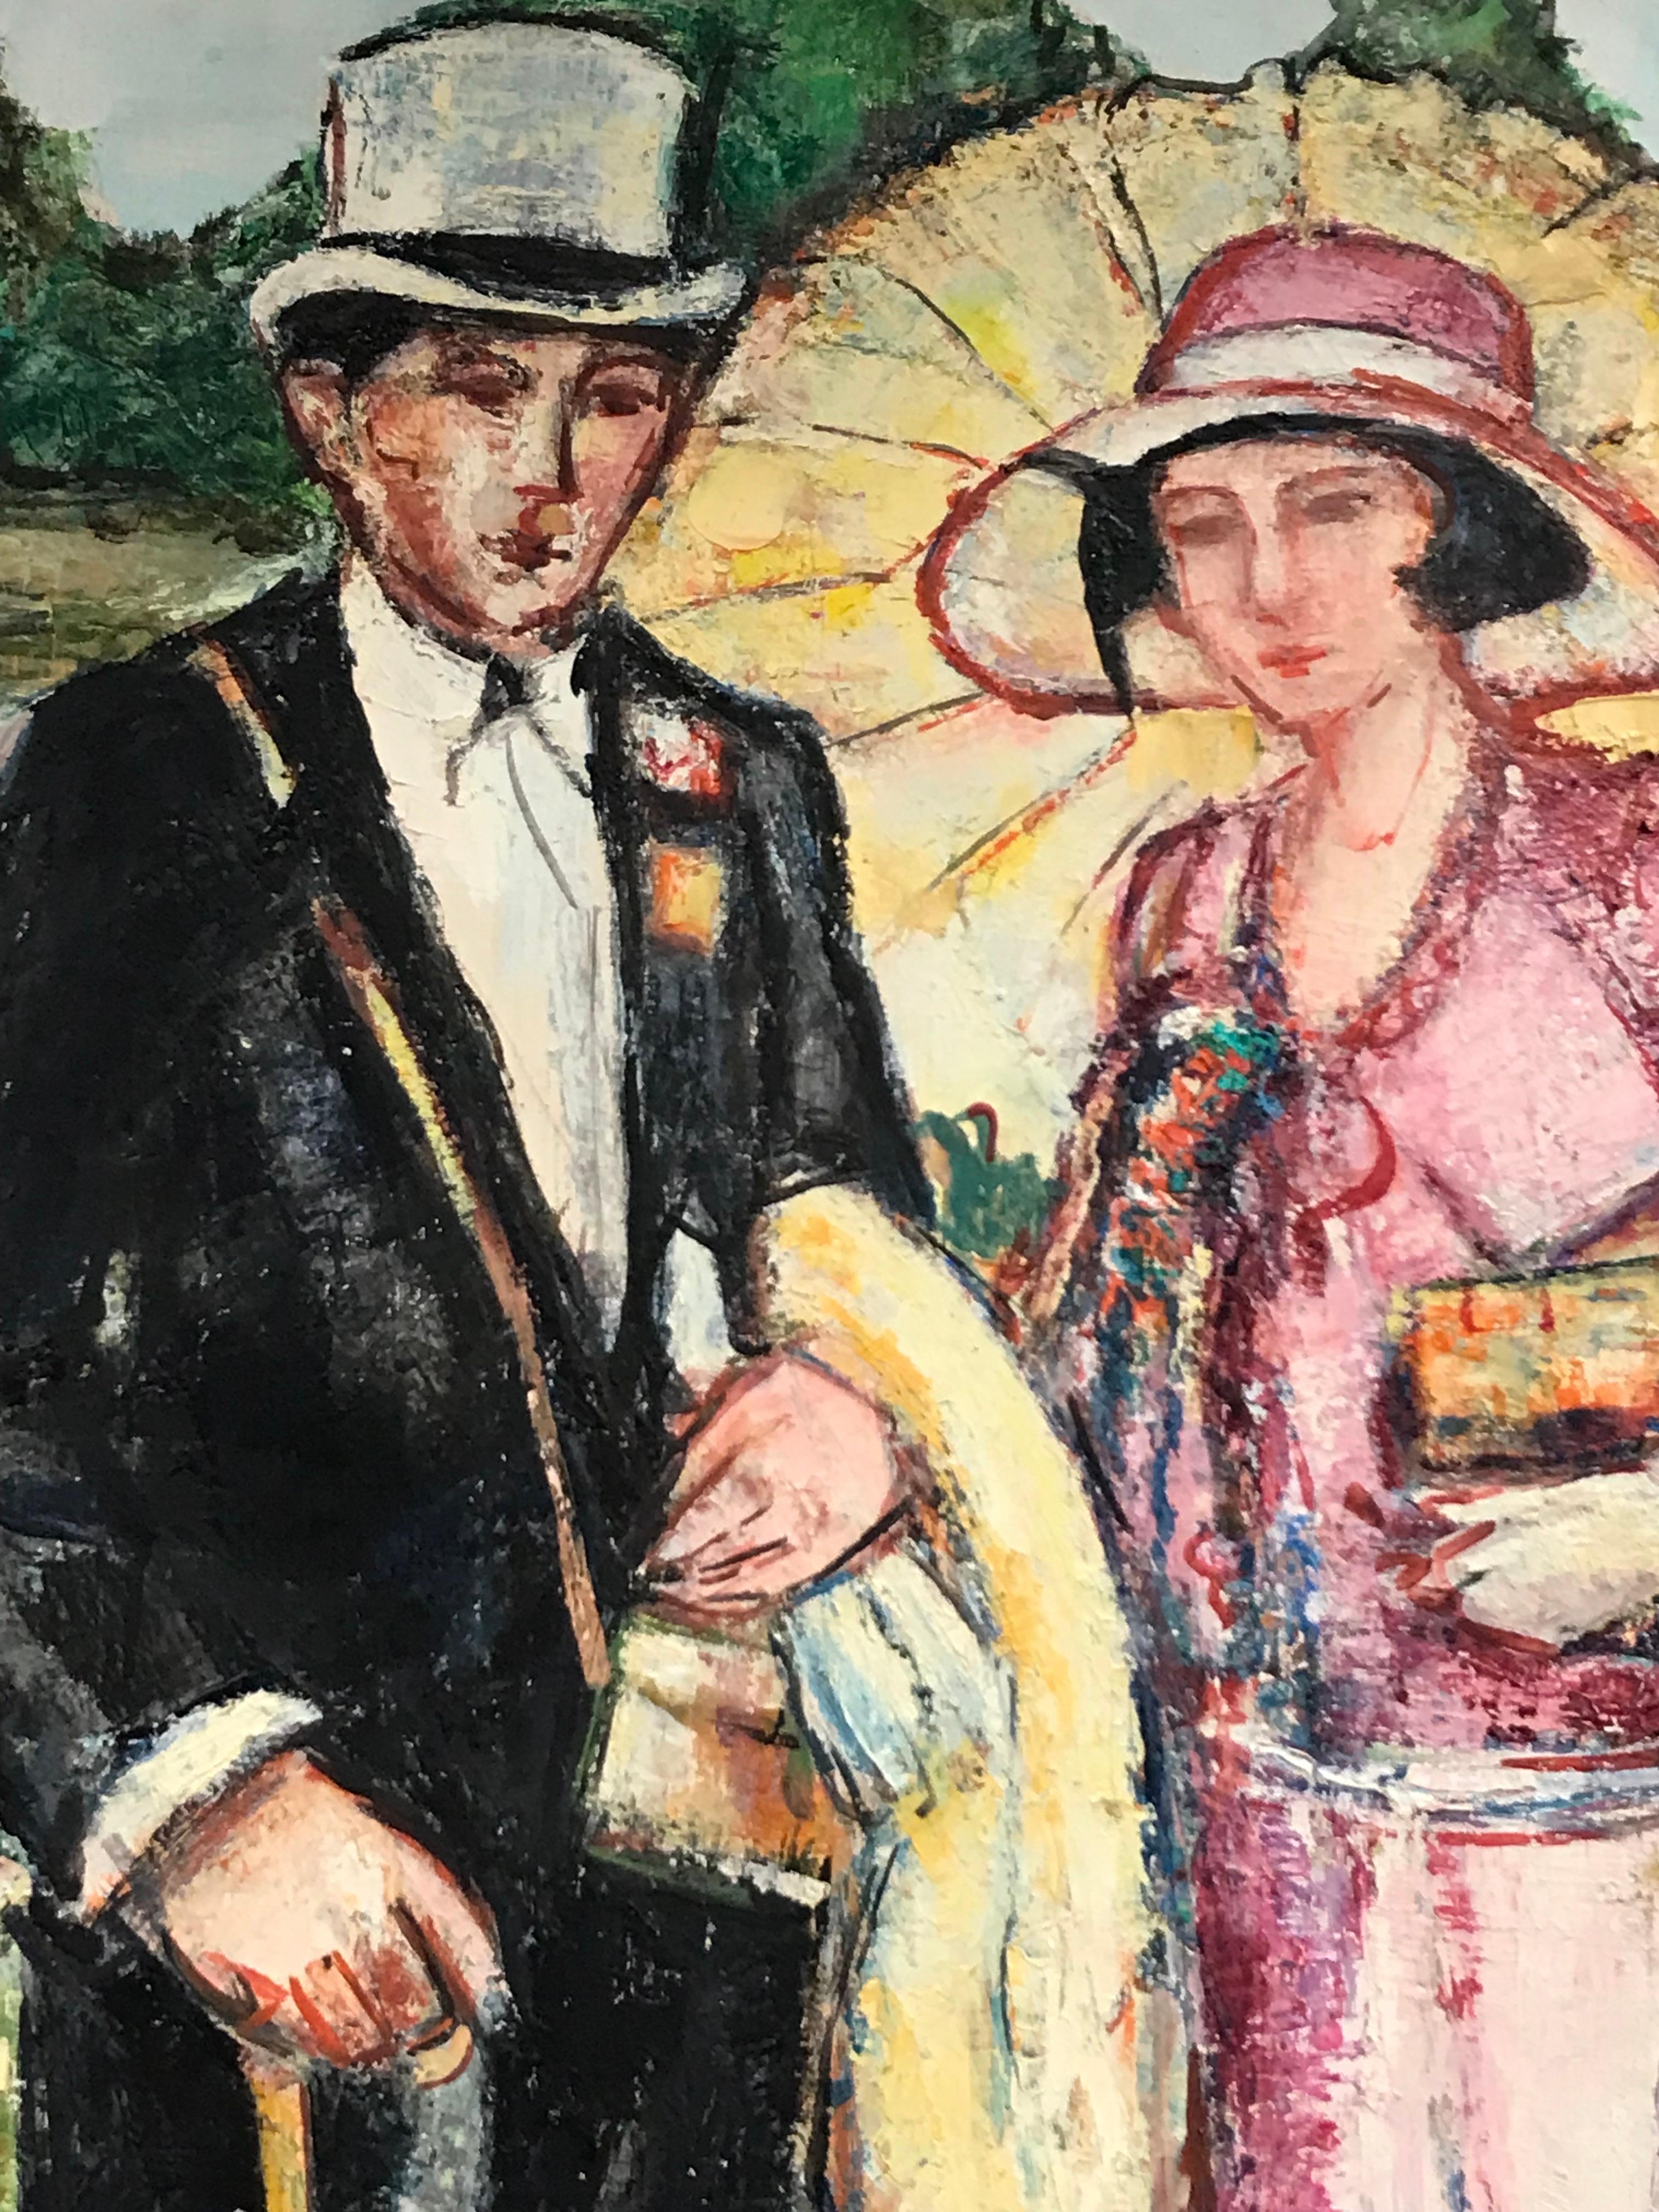 The Elegant Couple
by Maria Tort Xirau (Catalan, 1924-2018)
signed lower corner
dated 1991
oil painting on canvas, framed

canvas: 33.5 x 24 inches
framed: 38 x 28 inches

Very good condition. 

Provenance: from the artists estate, France

Maria